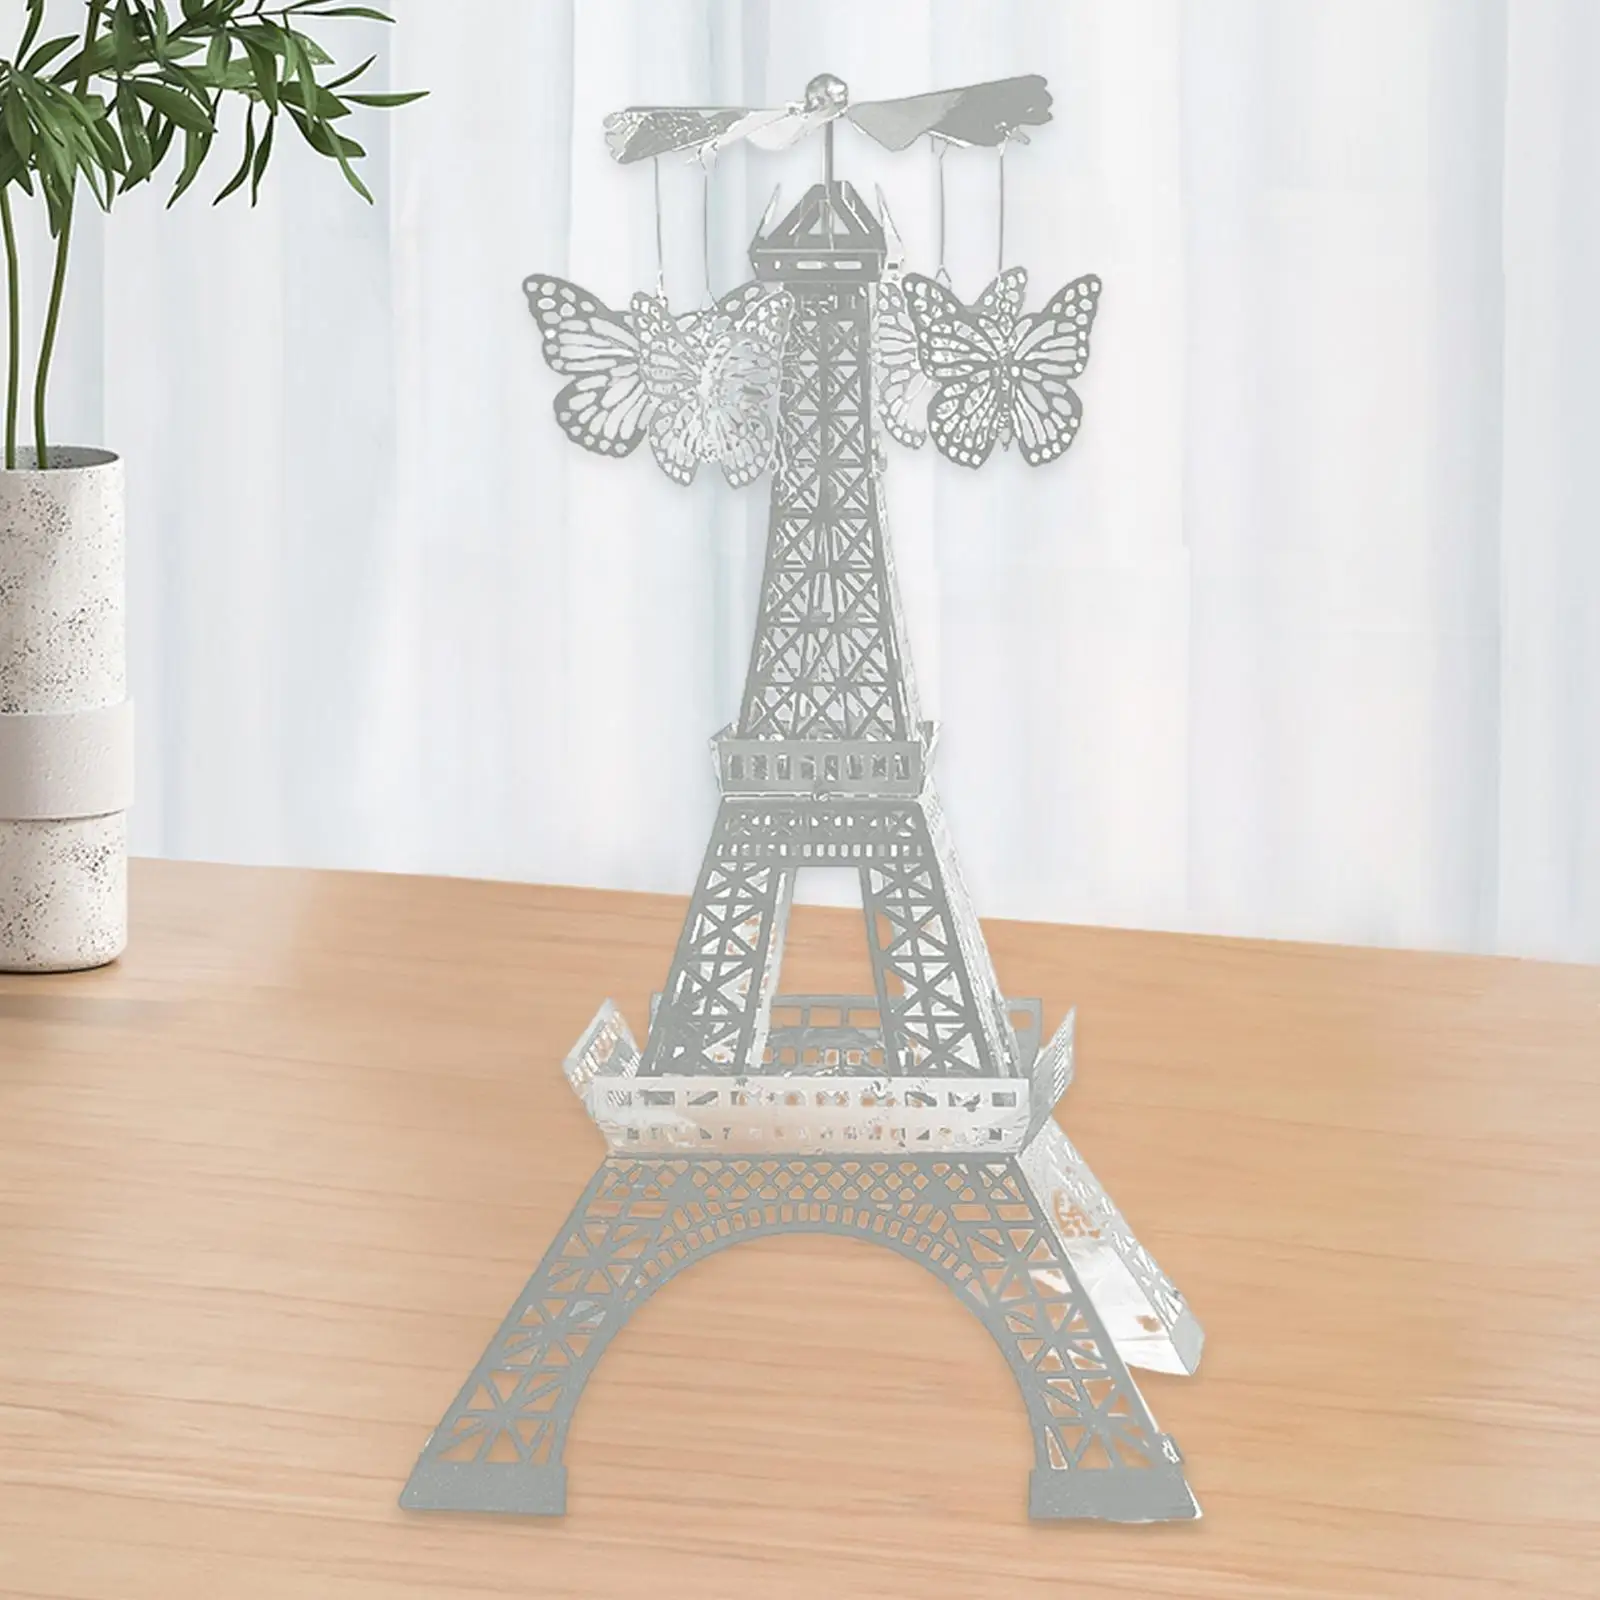 Eiffel Tower Sculptures Candle Holder Table Crafts Adornment Lovely Decor for Romantic Wedding, Christmas Party